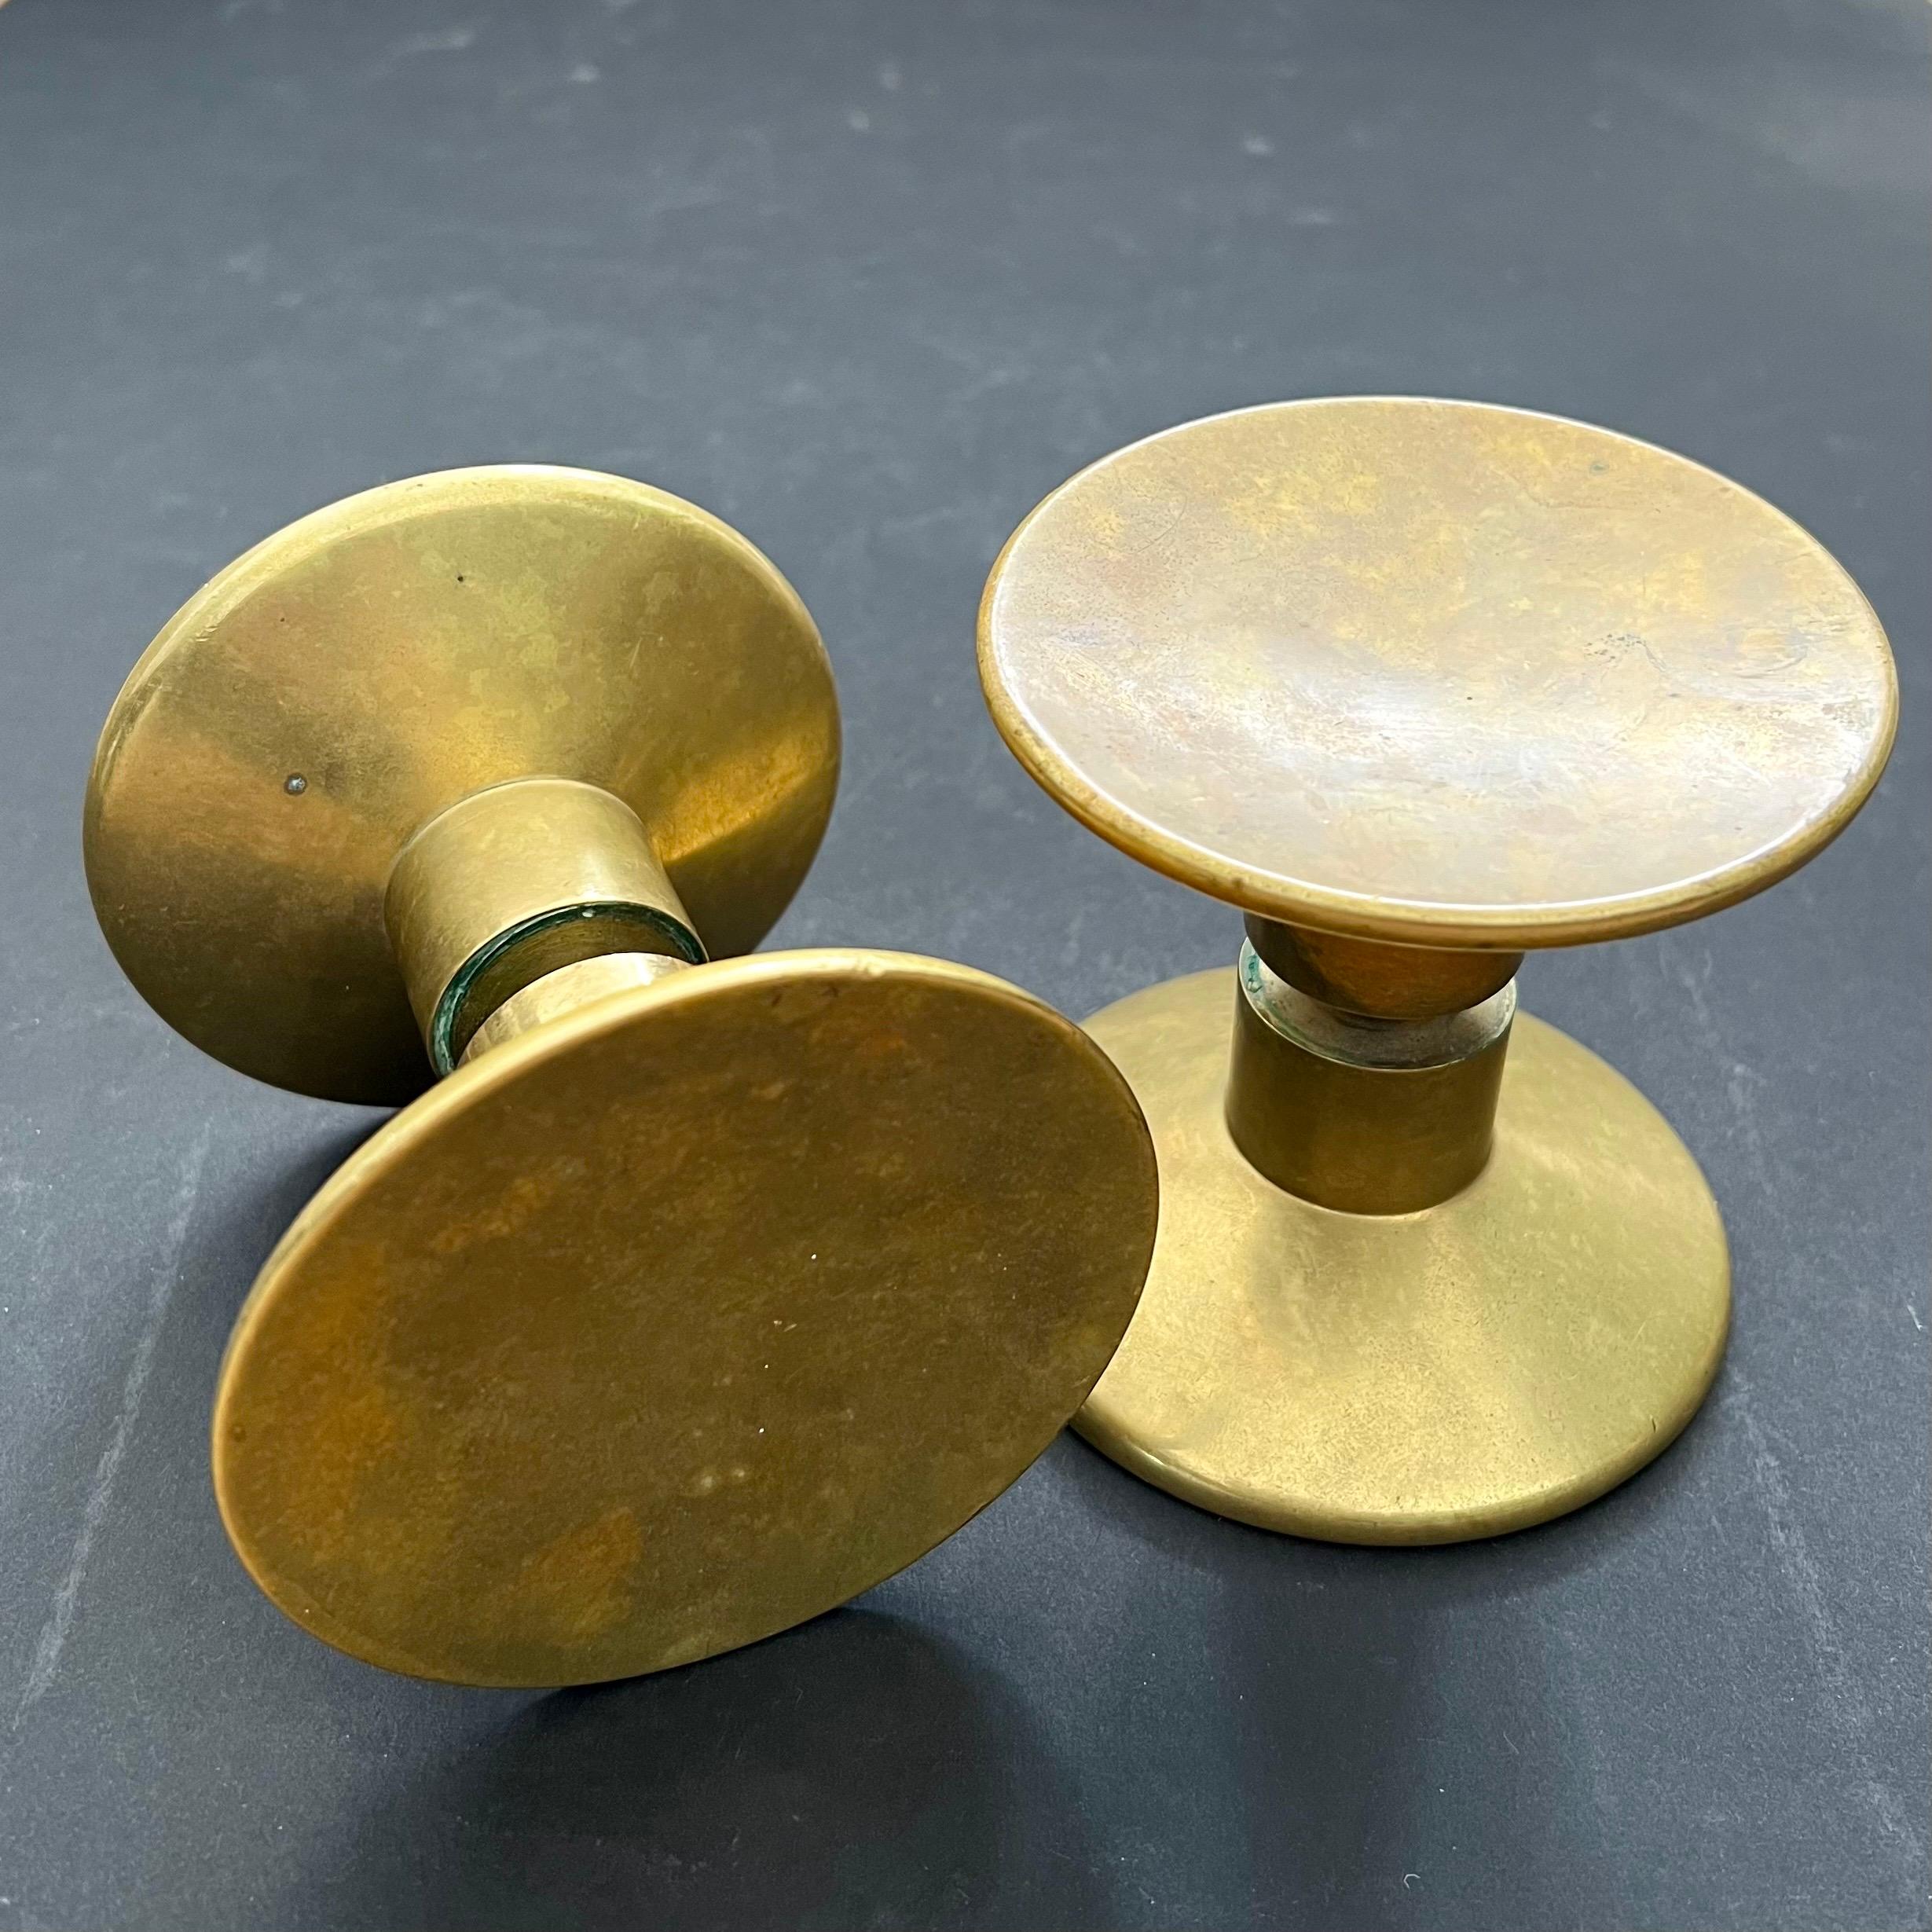 Two mid-size circular push-and-pull door handles in bronze, mid-20th century, France, sold as shown in image 1.

Simple elegant handles, made up of two separate round pieces, held by a connecting bolt. The components are in good vintage condition